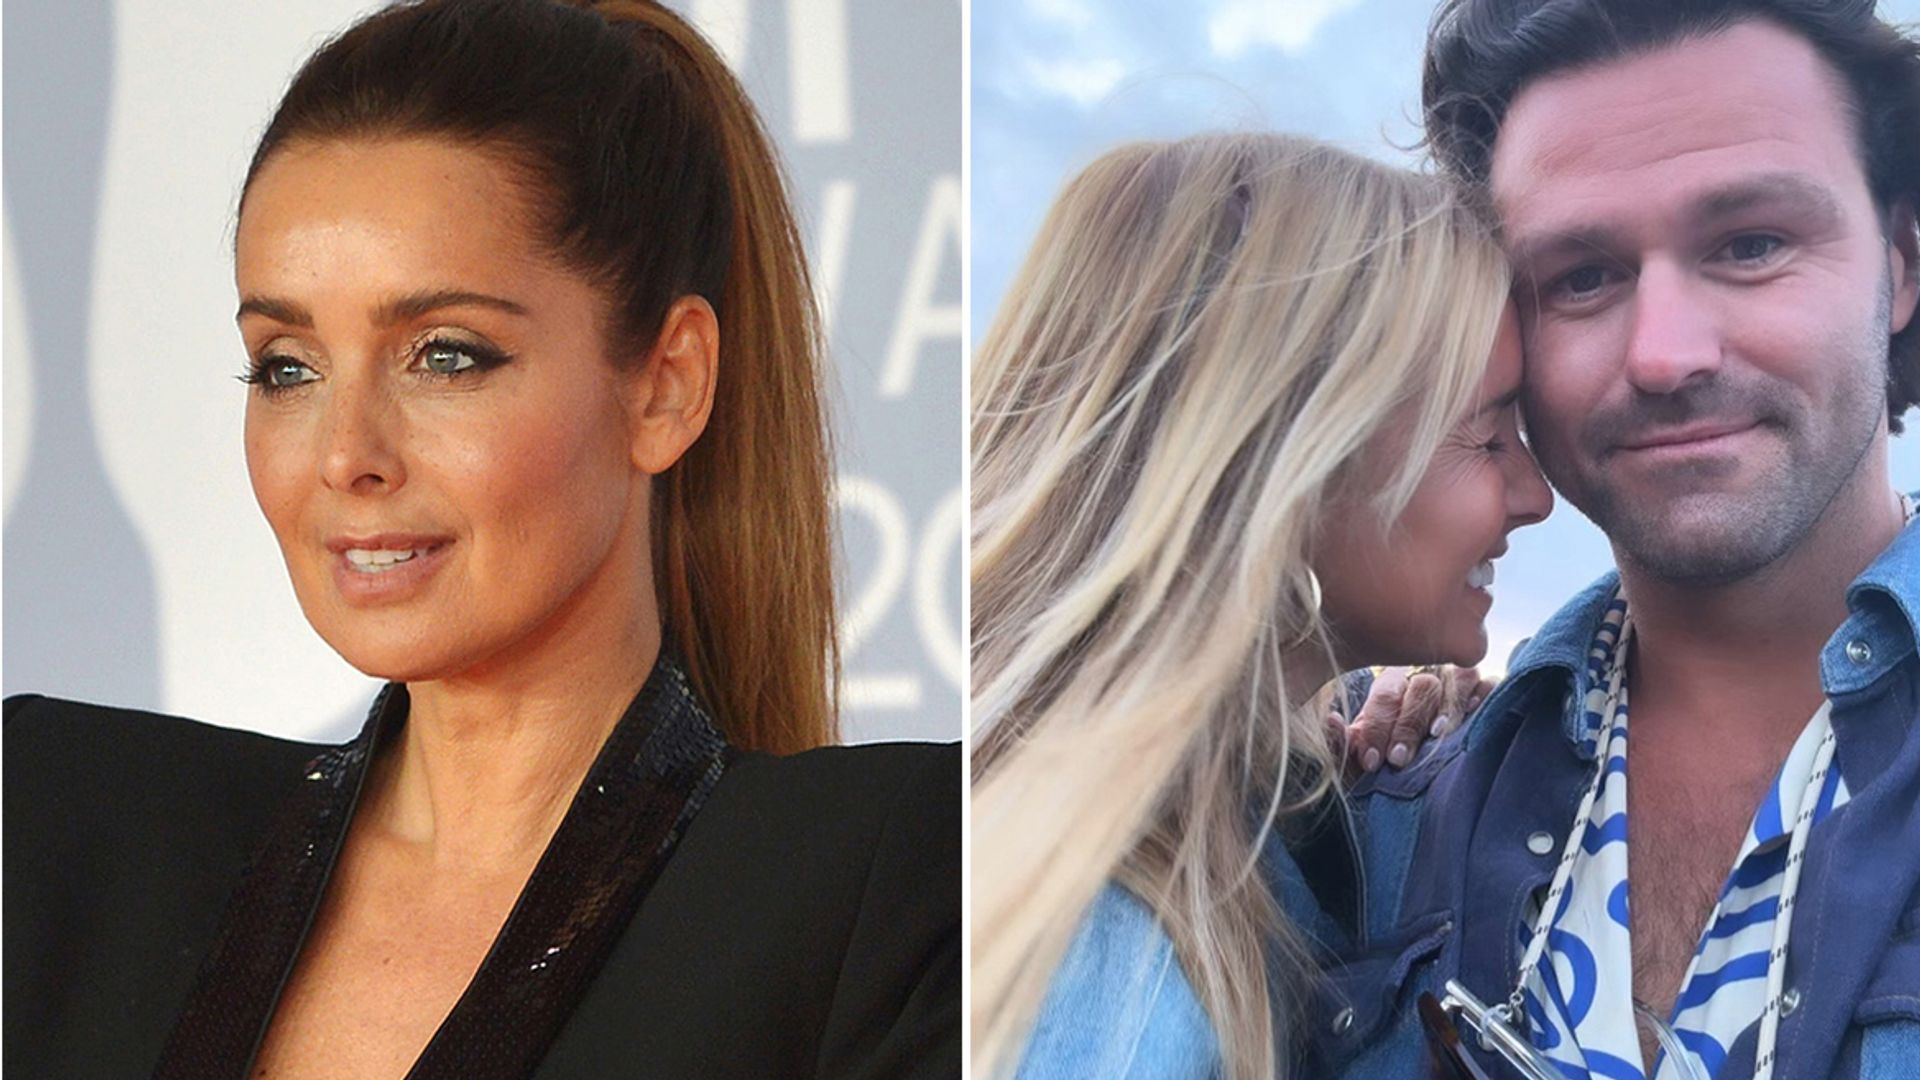 A split image of Louise Redknapp and her boyfriend Drew